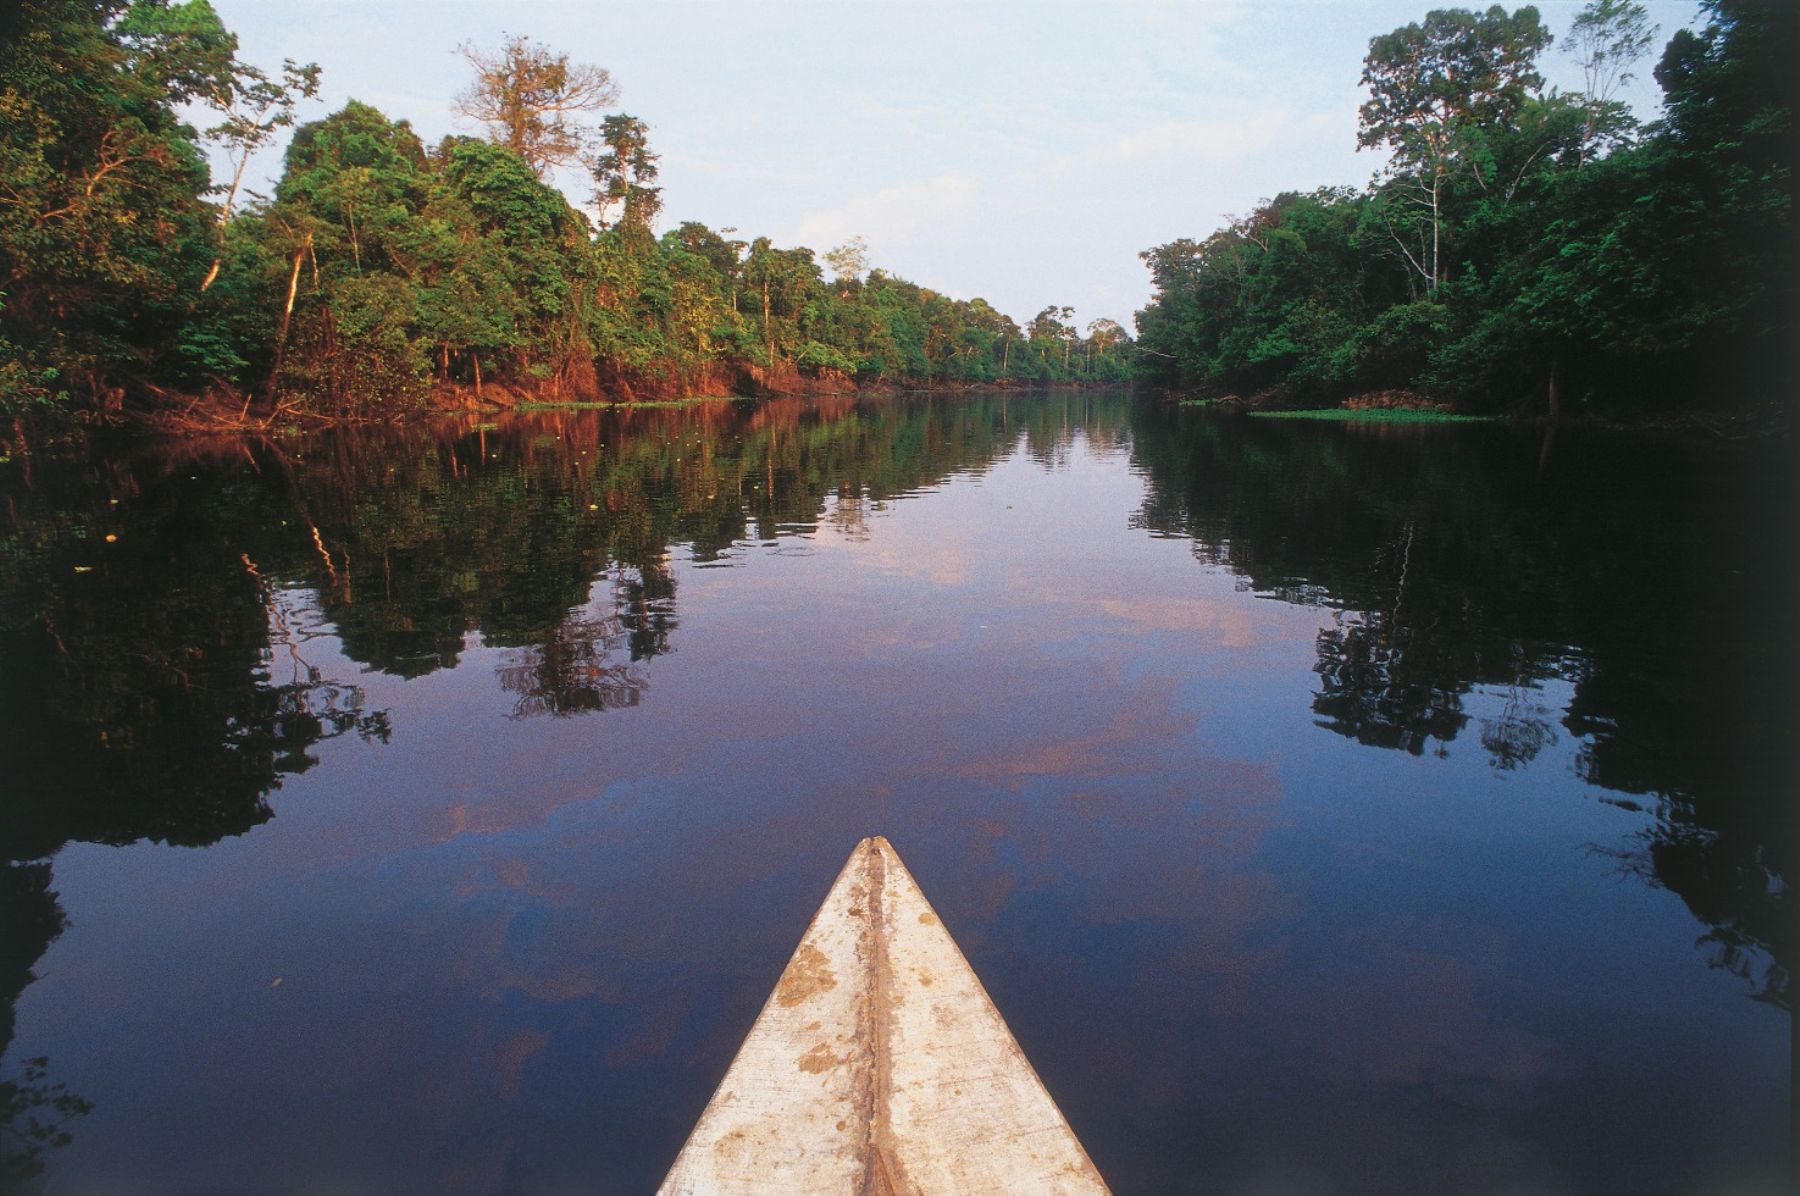 Tourism in Amazon River expected to double in next two years | News ...